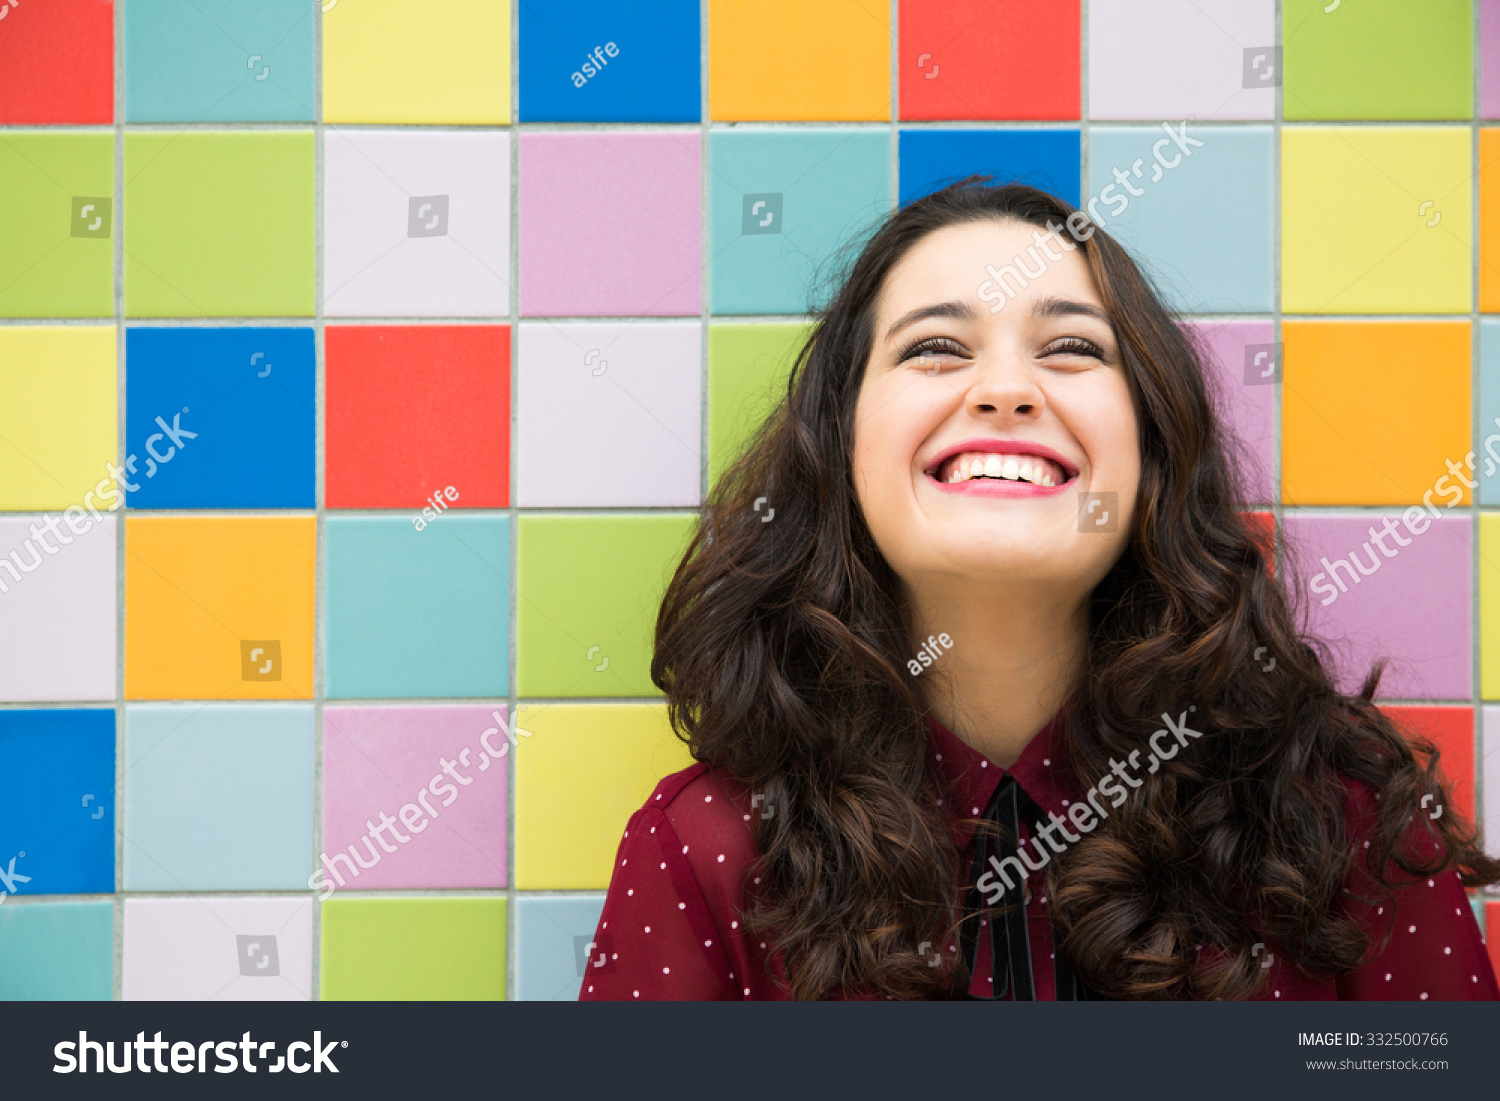 Happy girl laughing against a colorful tiles background. Concept of joy #332500766